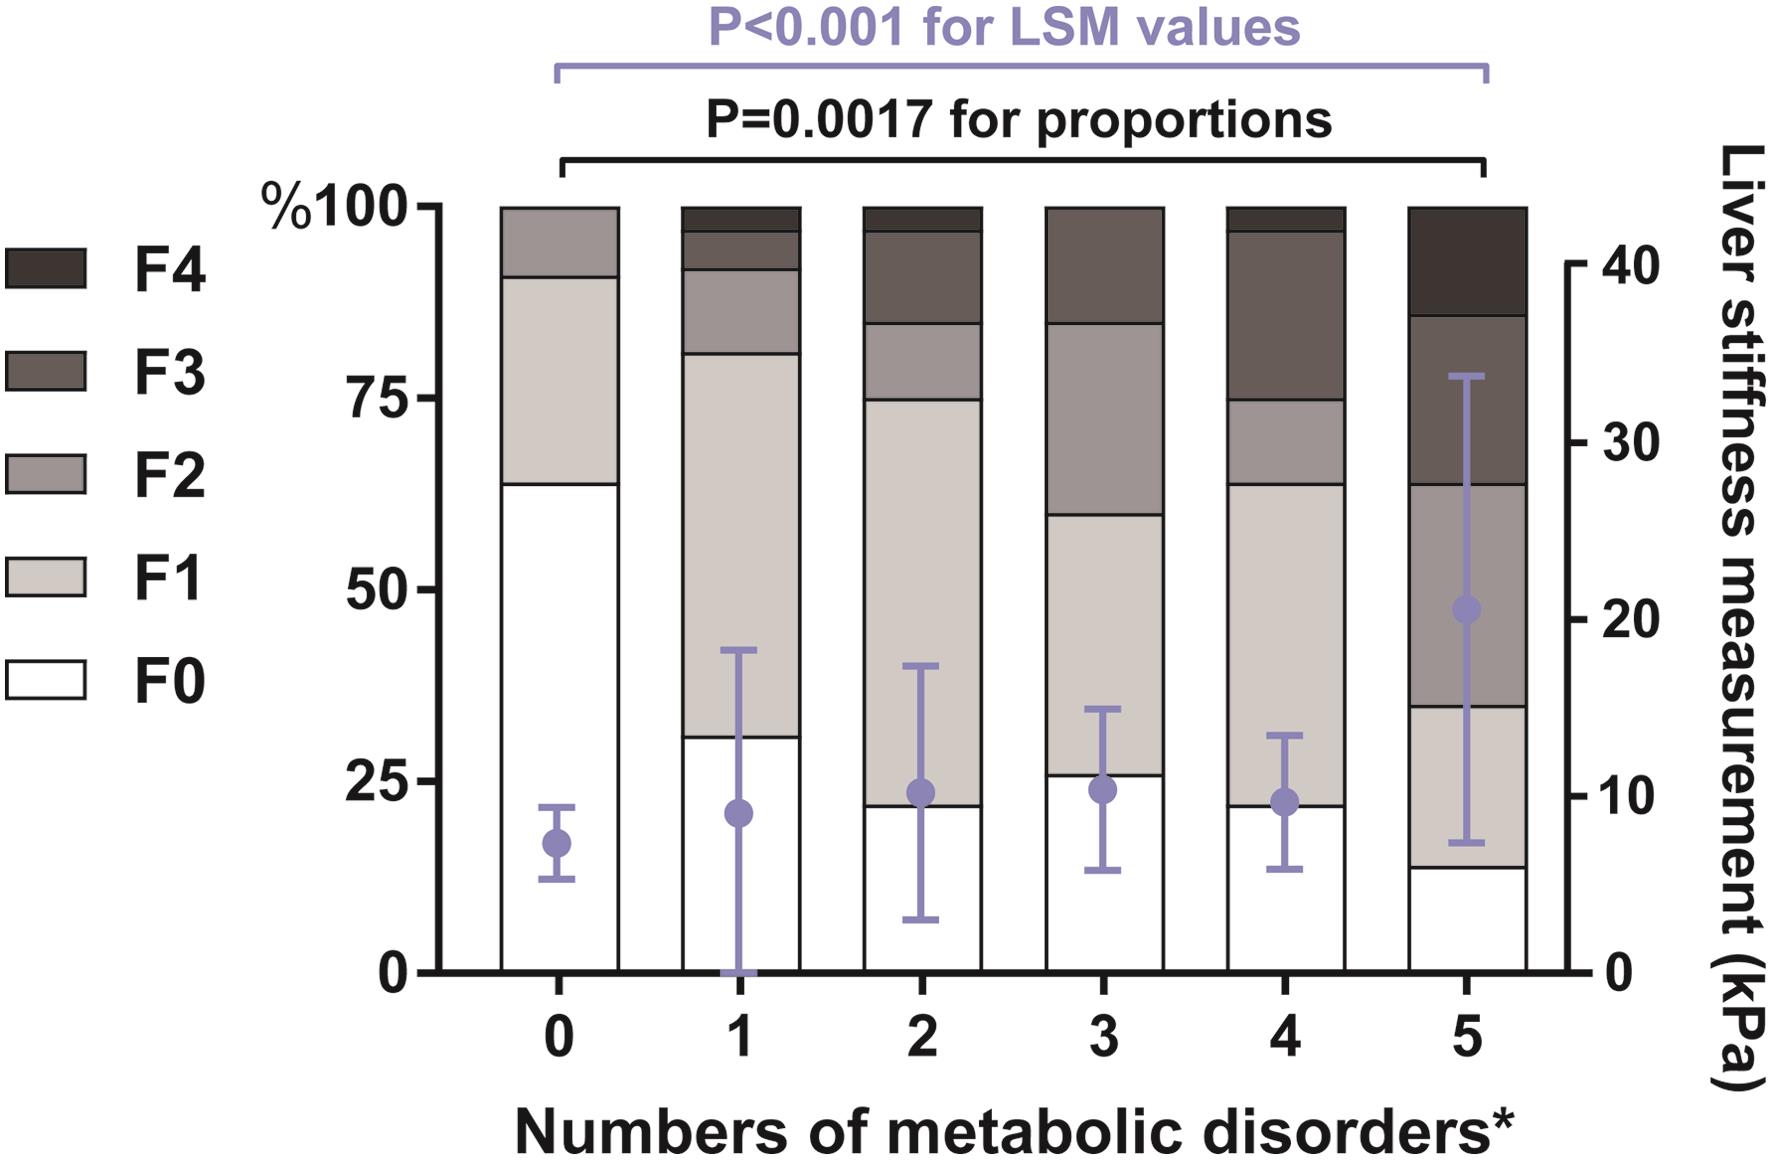 Association between fibrosis stages and LSM with numbers of metabolic disorders.